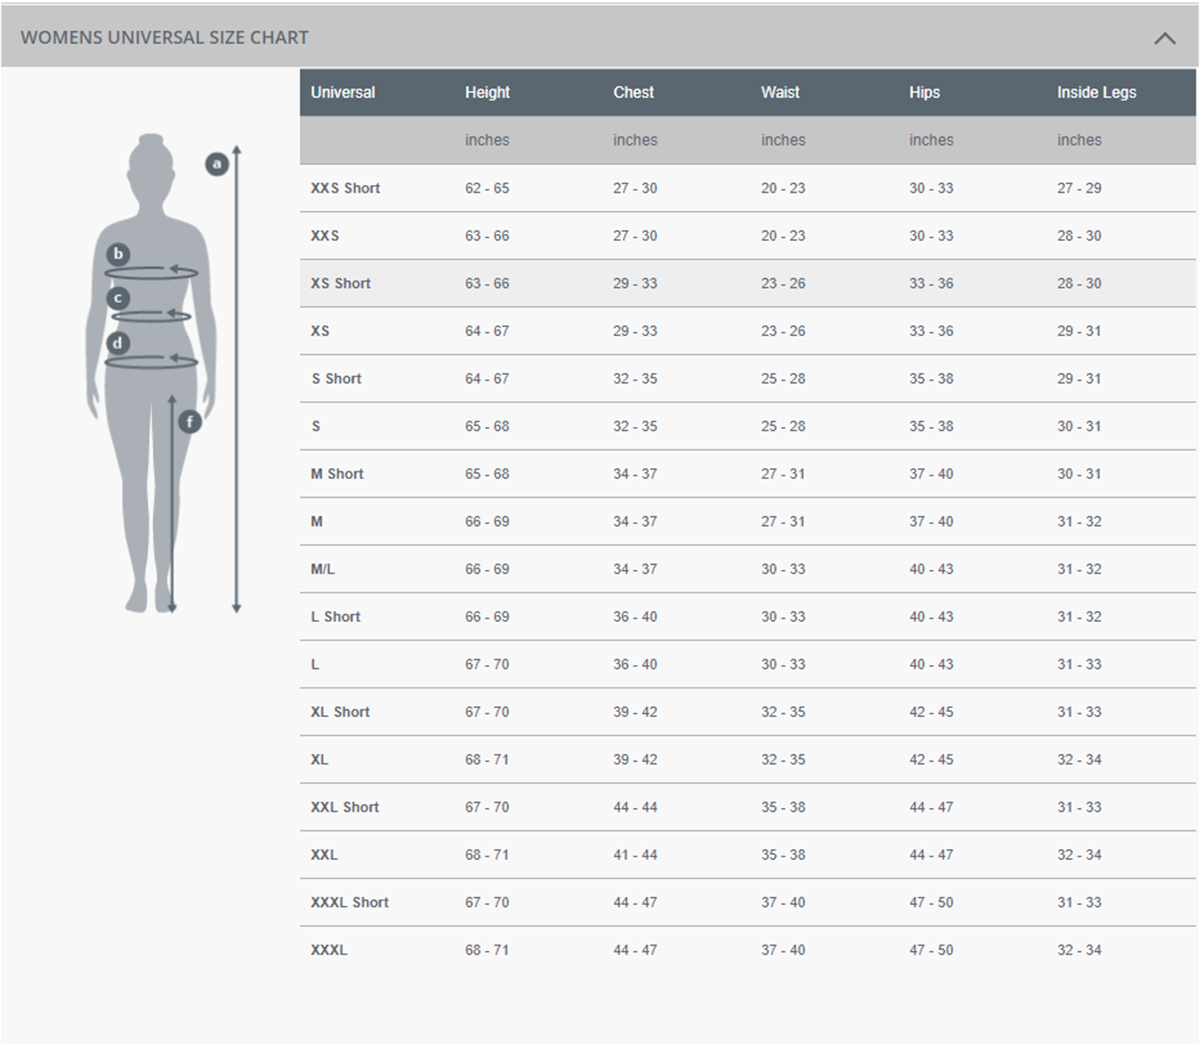 Female Size Chart for Women's Xenos 5mm Wetsuit